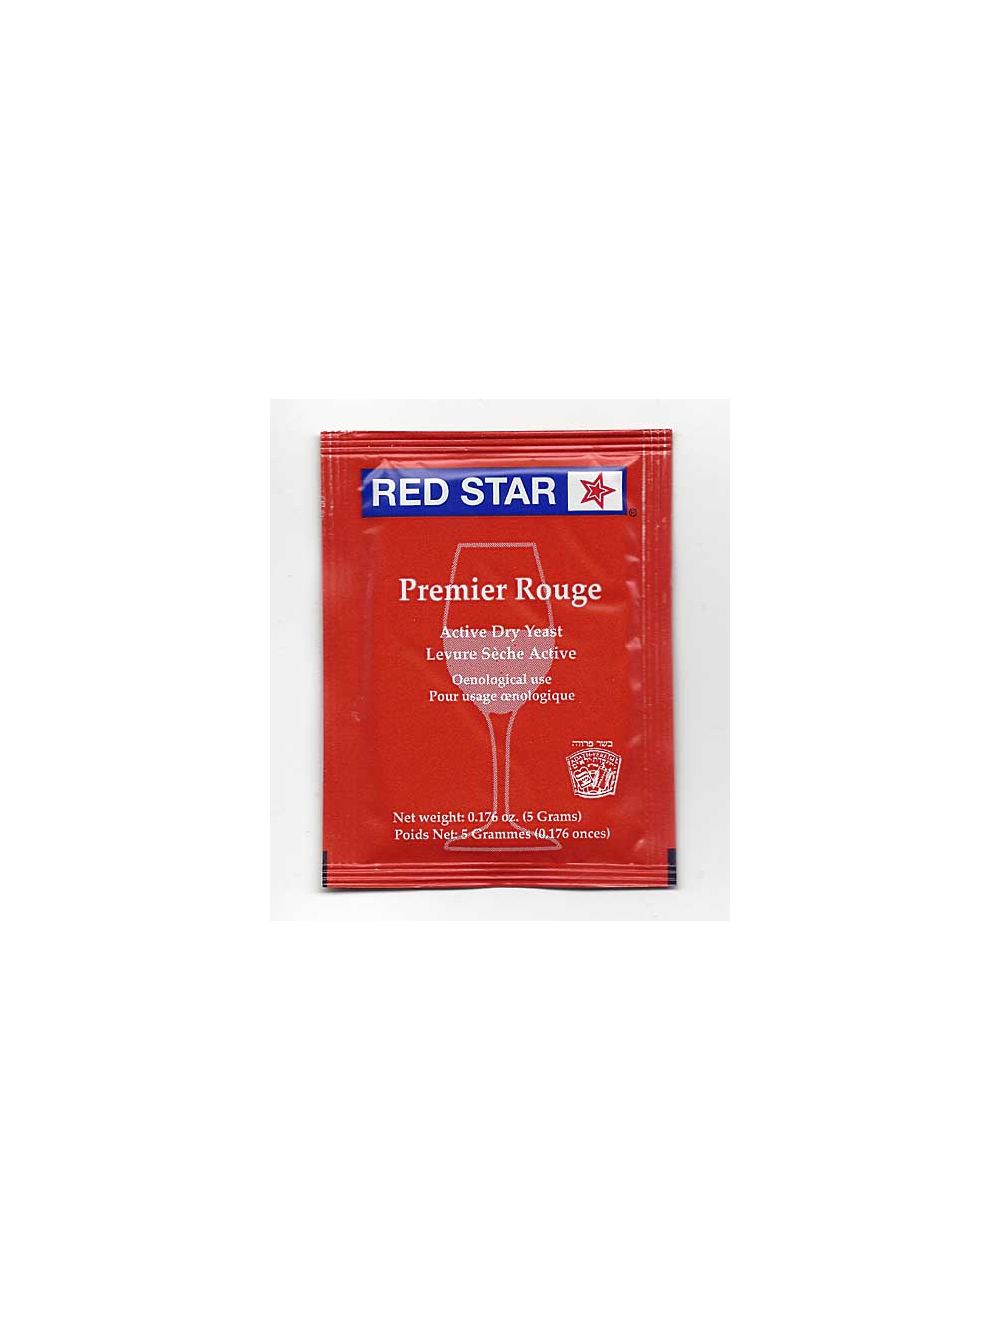 10 Packets Red Star Premier Rouge formerly Pasteur Red Dried Wine Yeast